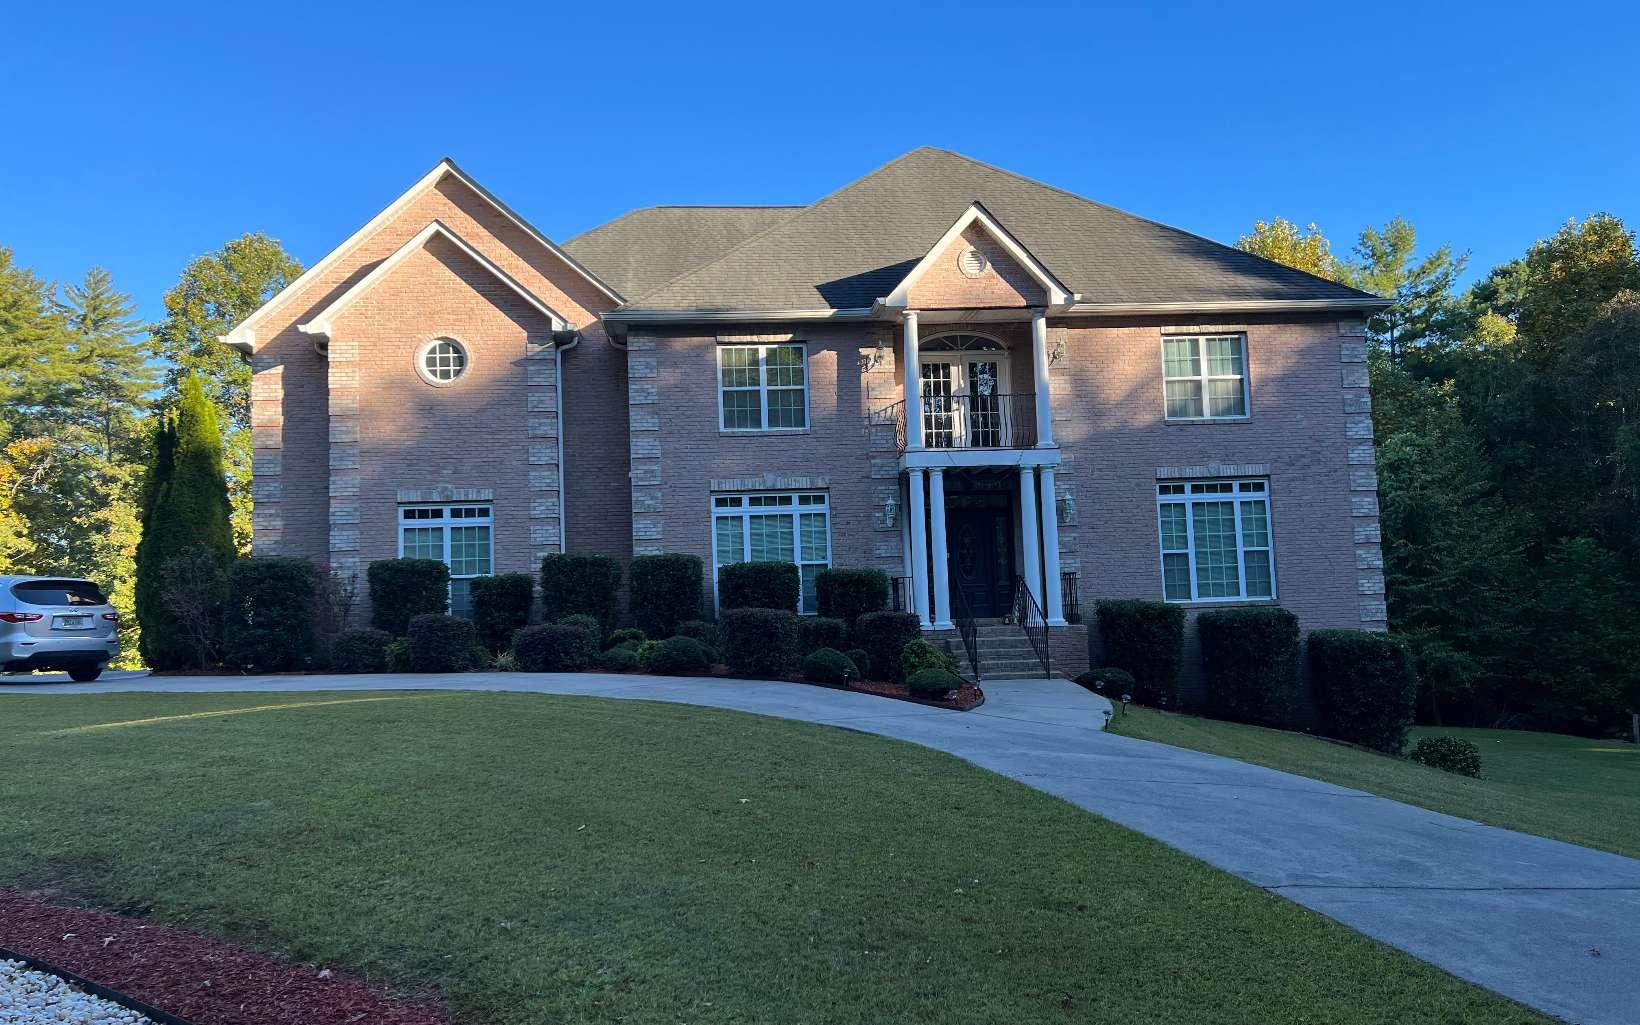 This is a custom built home. It is a three sided brick home that is three levels which includes the basement level. Very spacious and open. It is a pink brick color. It has two sets of stairs. Has a curved entrance stair. Has granite countertops. Has a guest room with a bathroom on the first floor. It is a three car garage. It has a sunroom and a recreational room. The basement is totally finished out. It also includes a second kitchen.